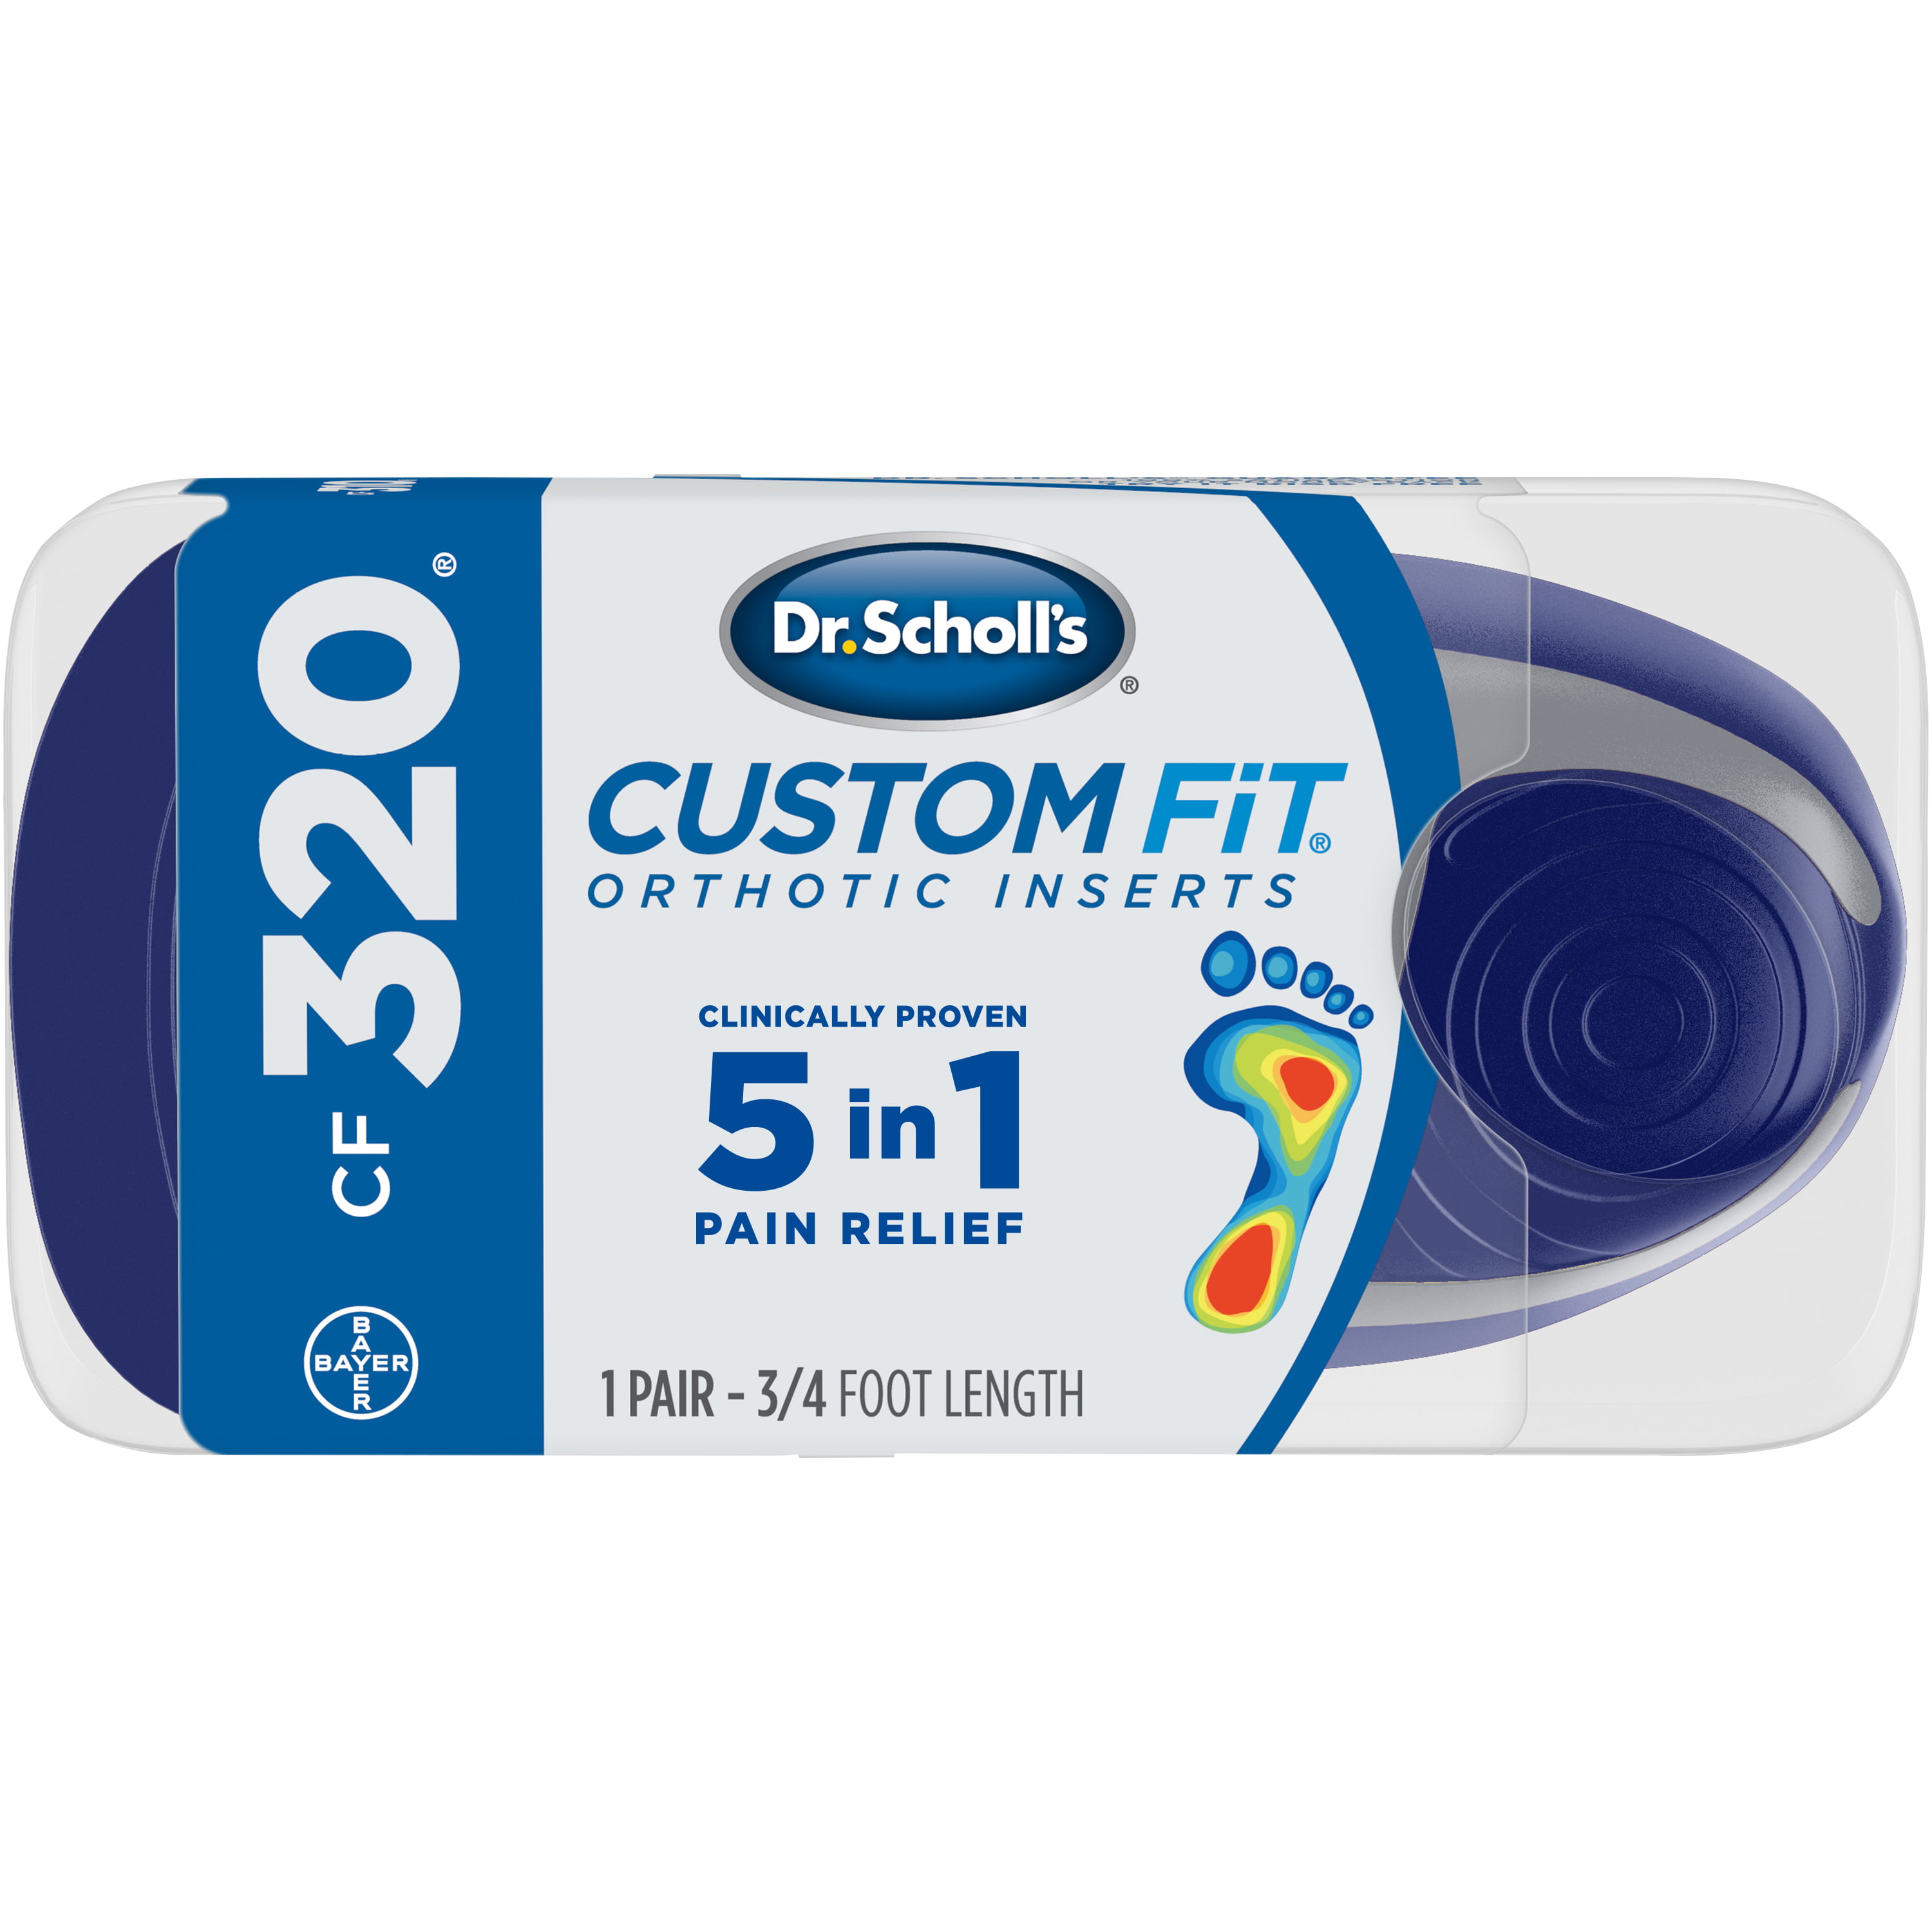 CF 110 Dr Scholl's Custom Fit Orthotic Inserts 